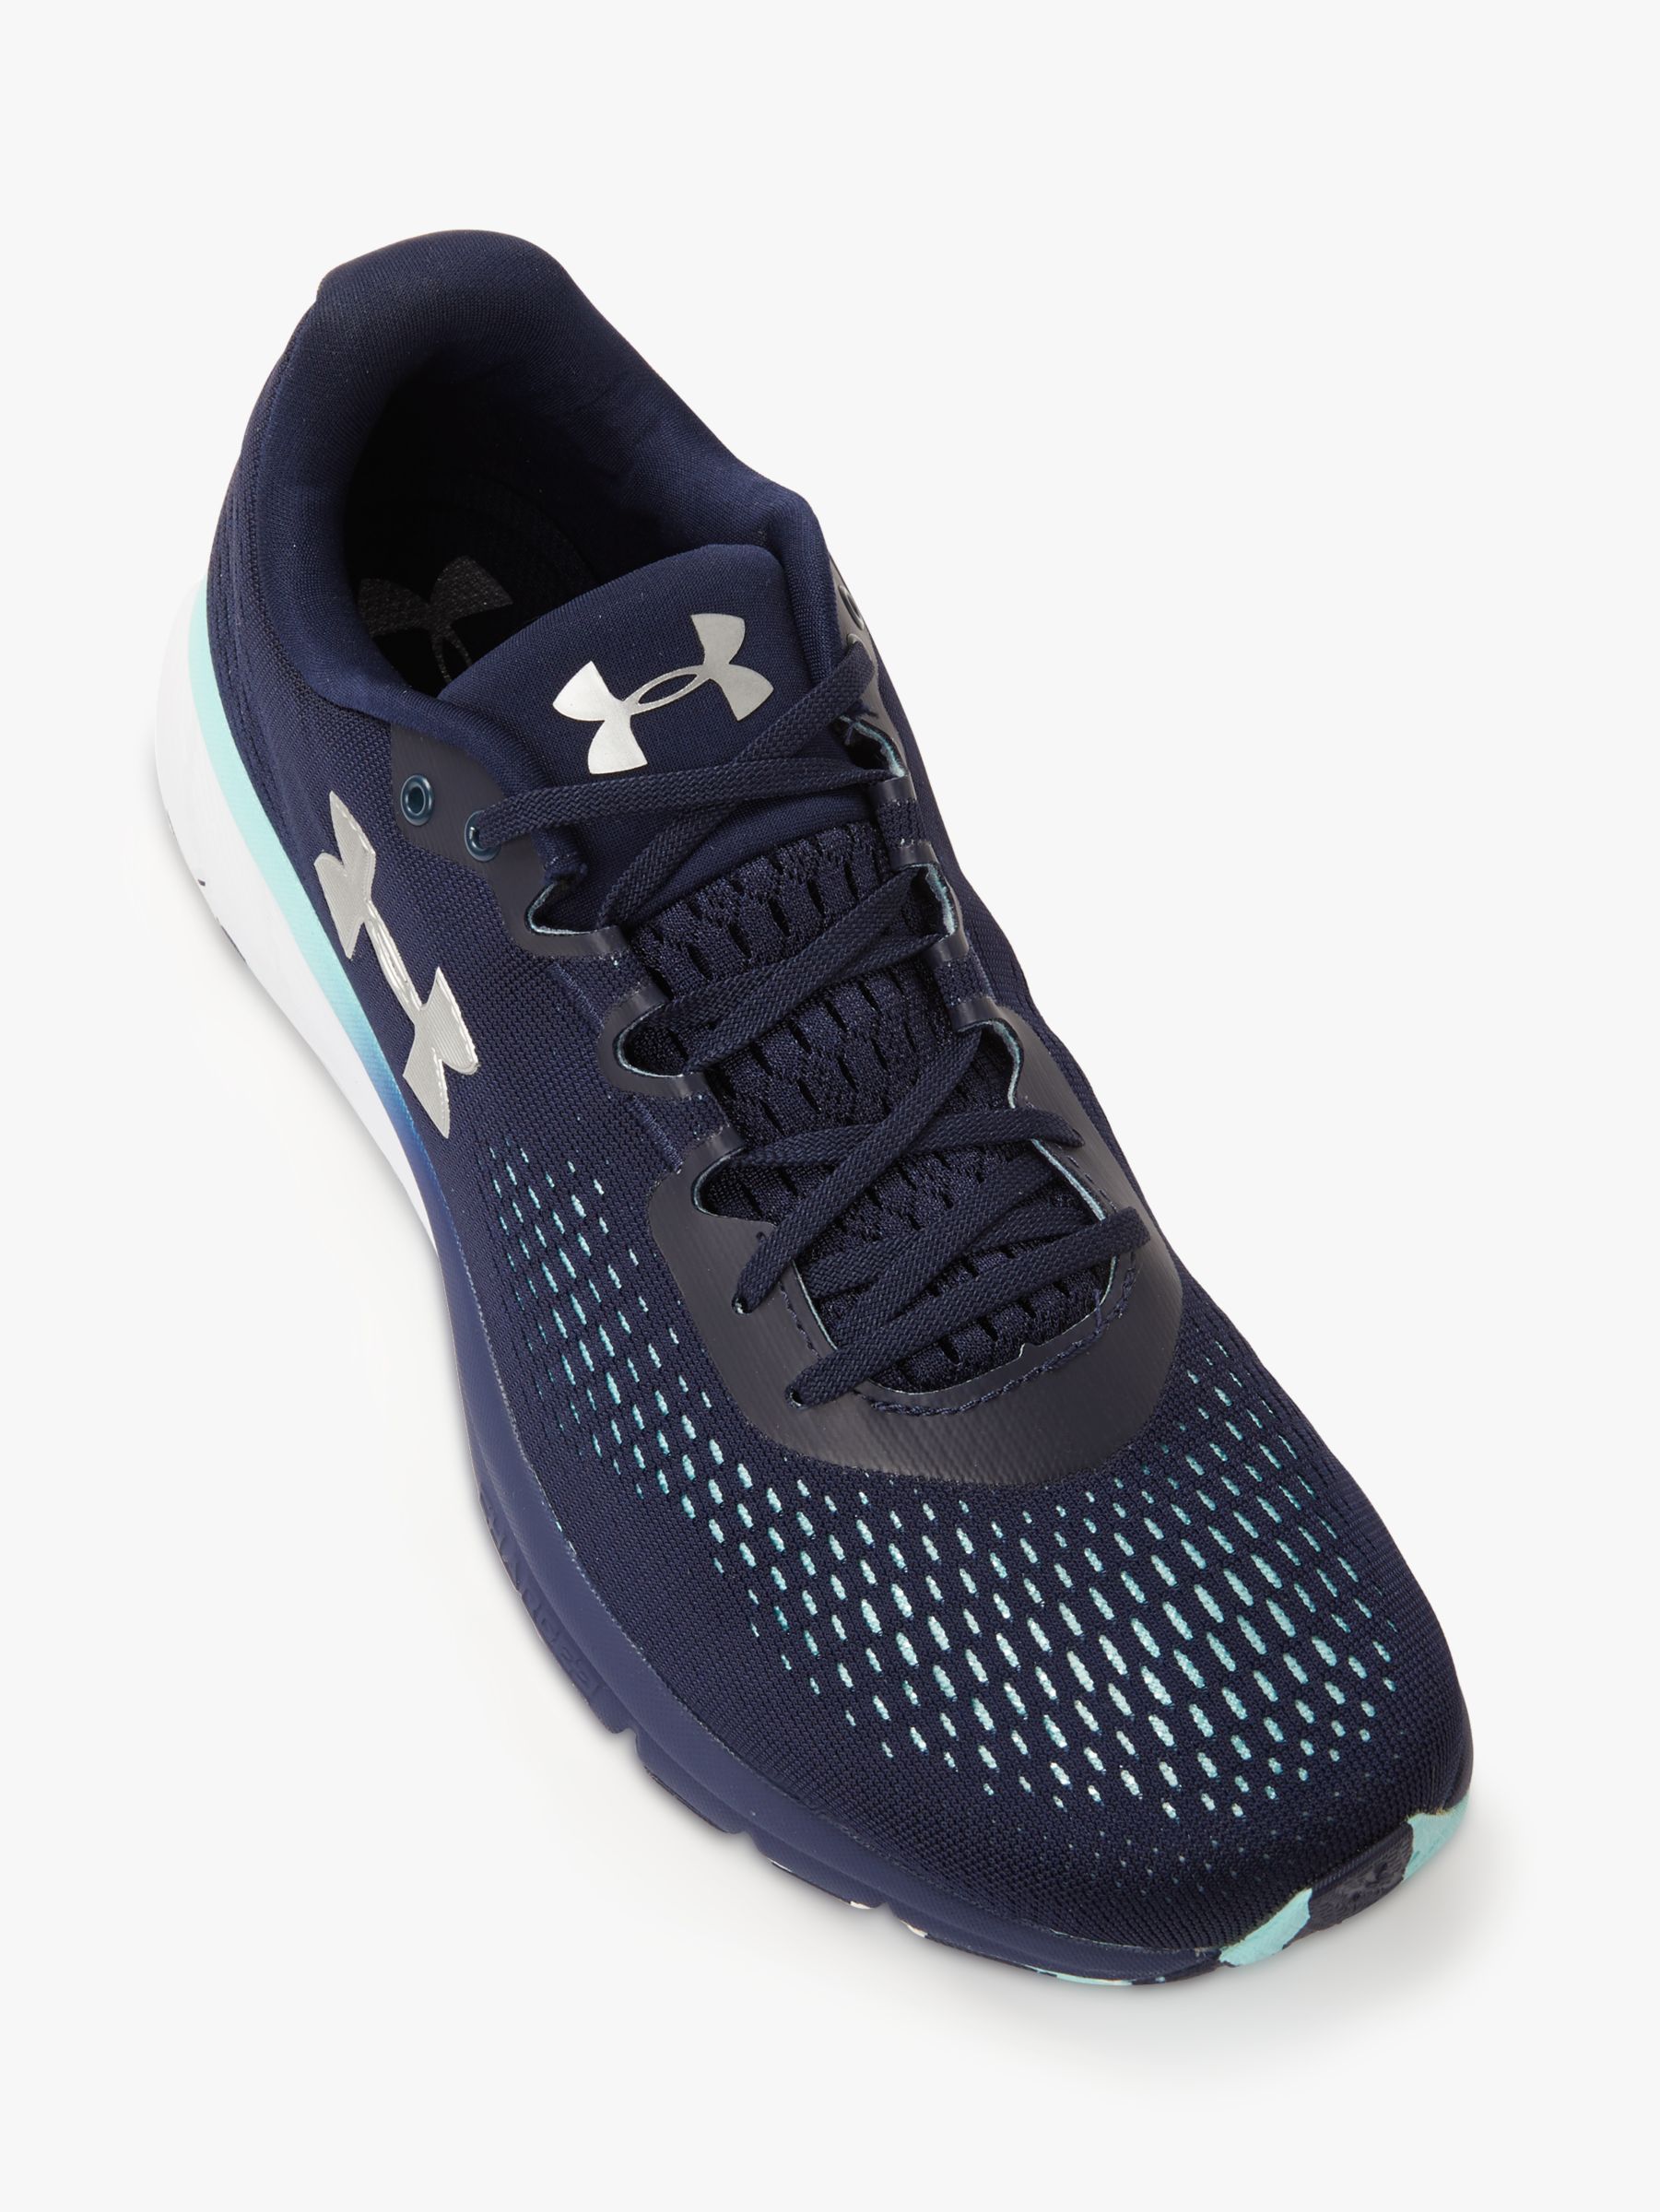 navy blue under armour shoes women's